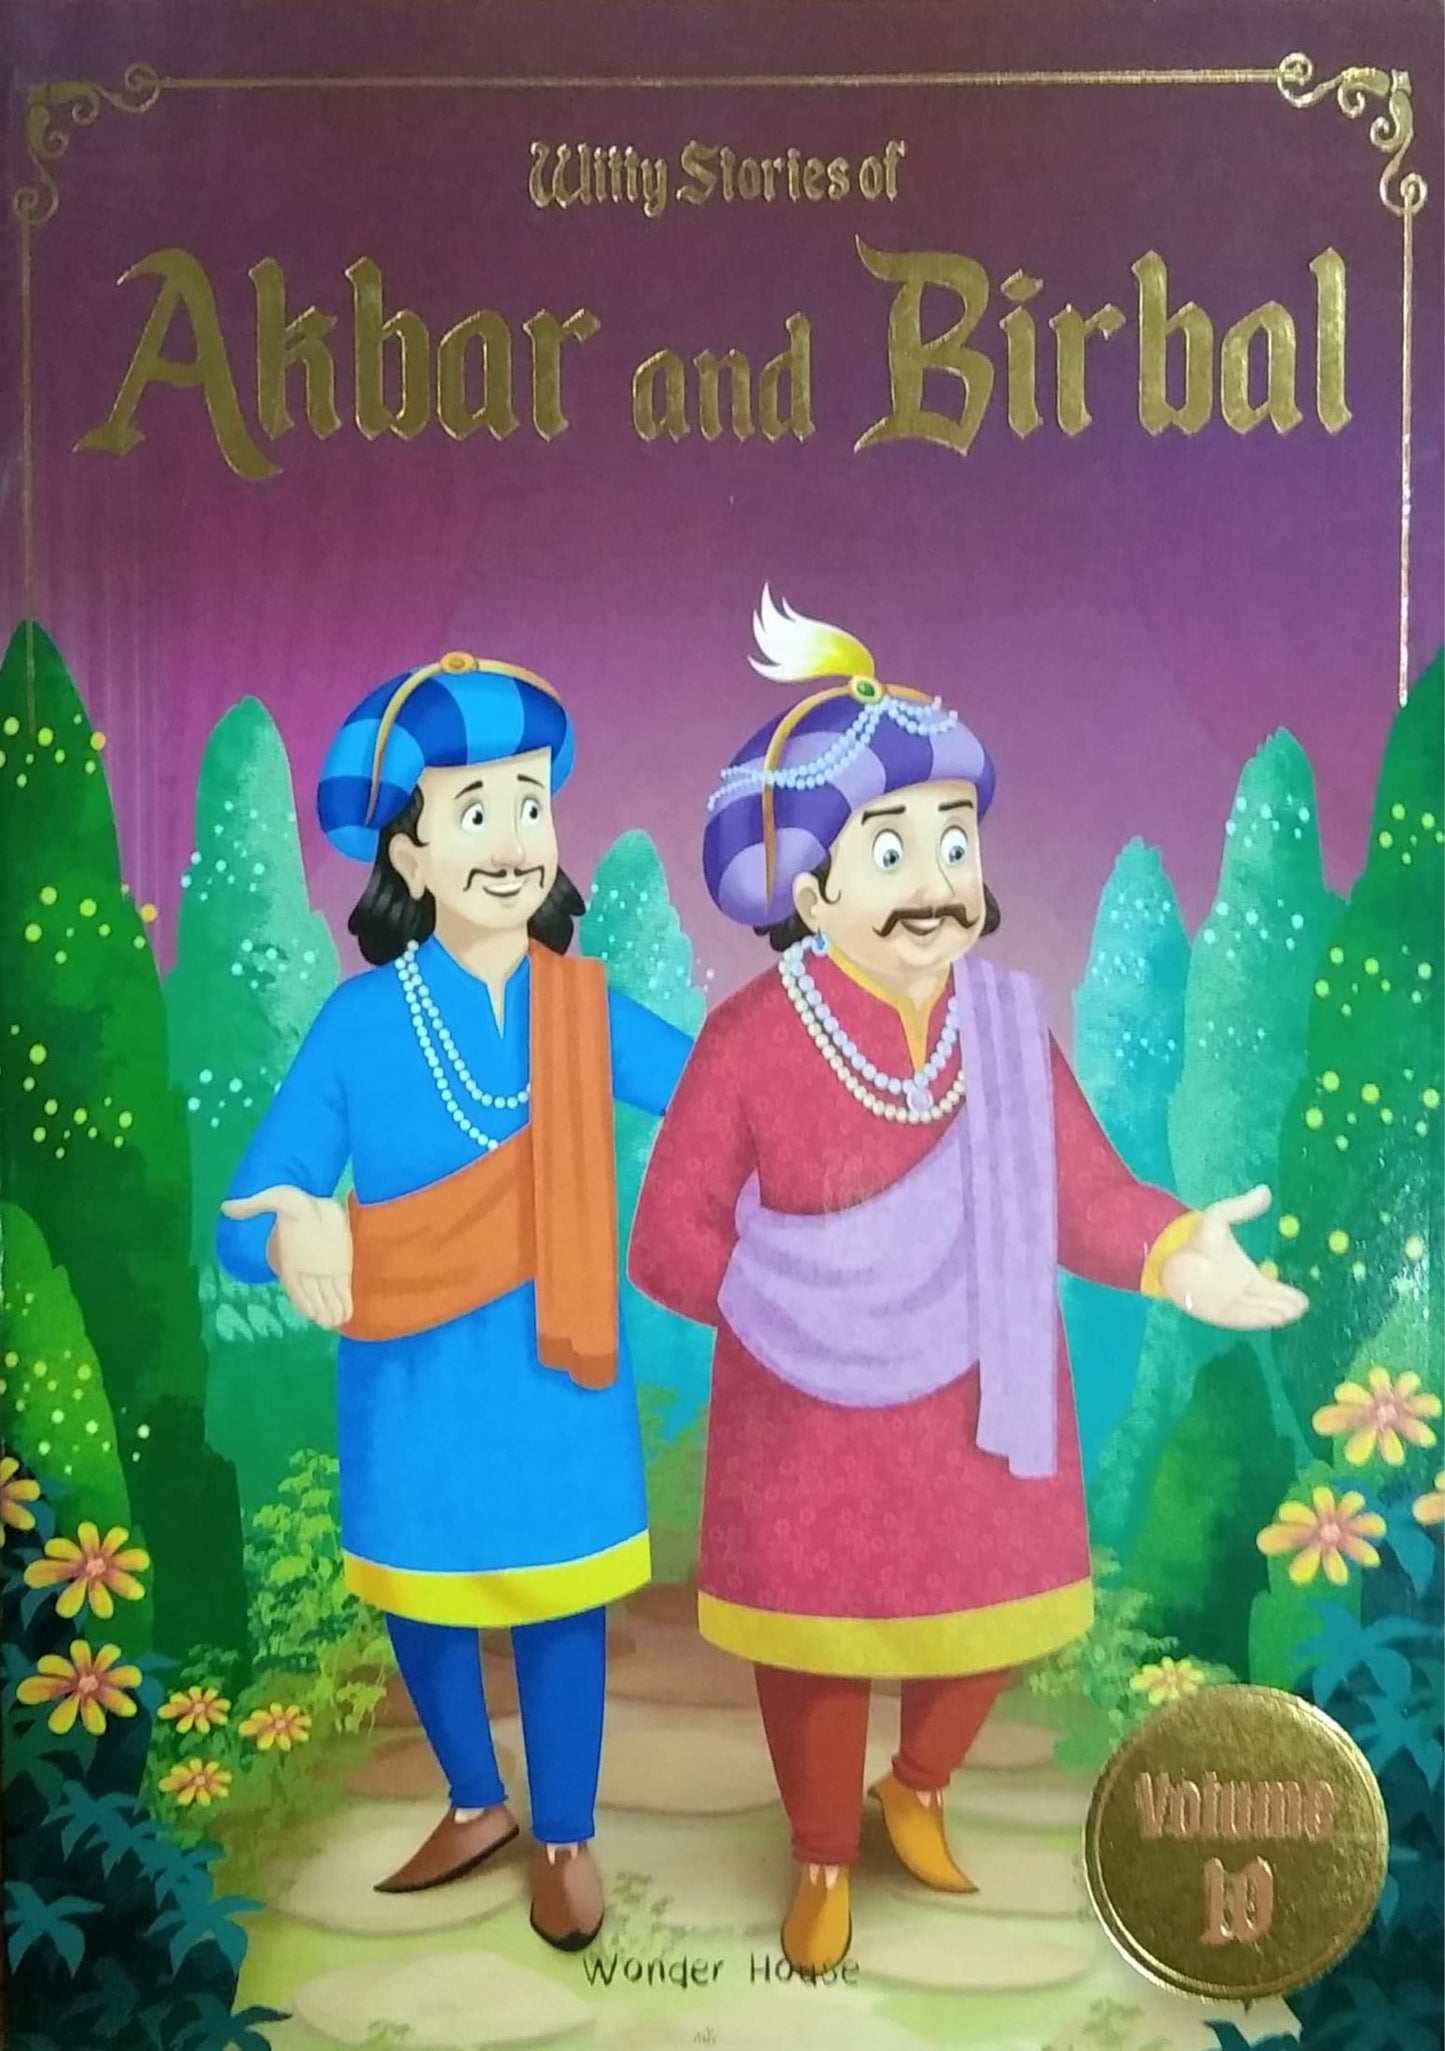 Witty Stories of Akbar and Birbal - 10